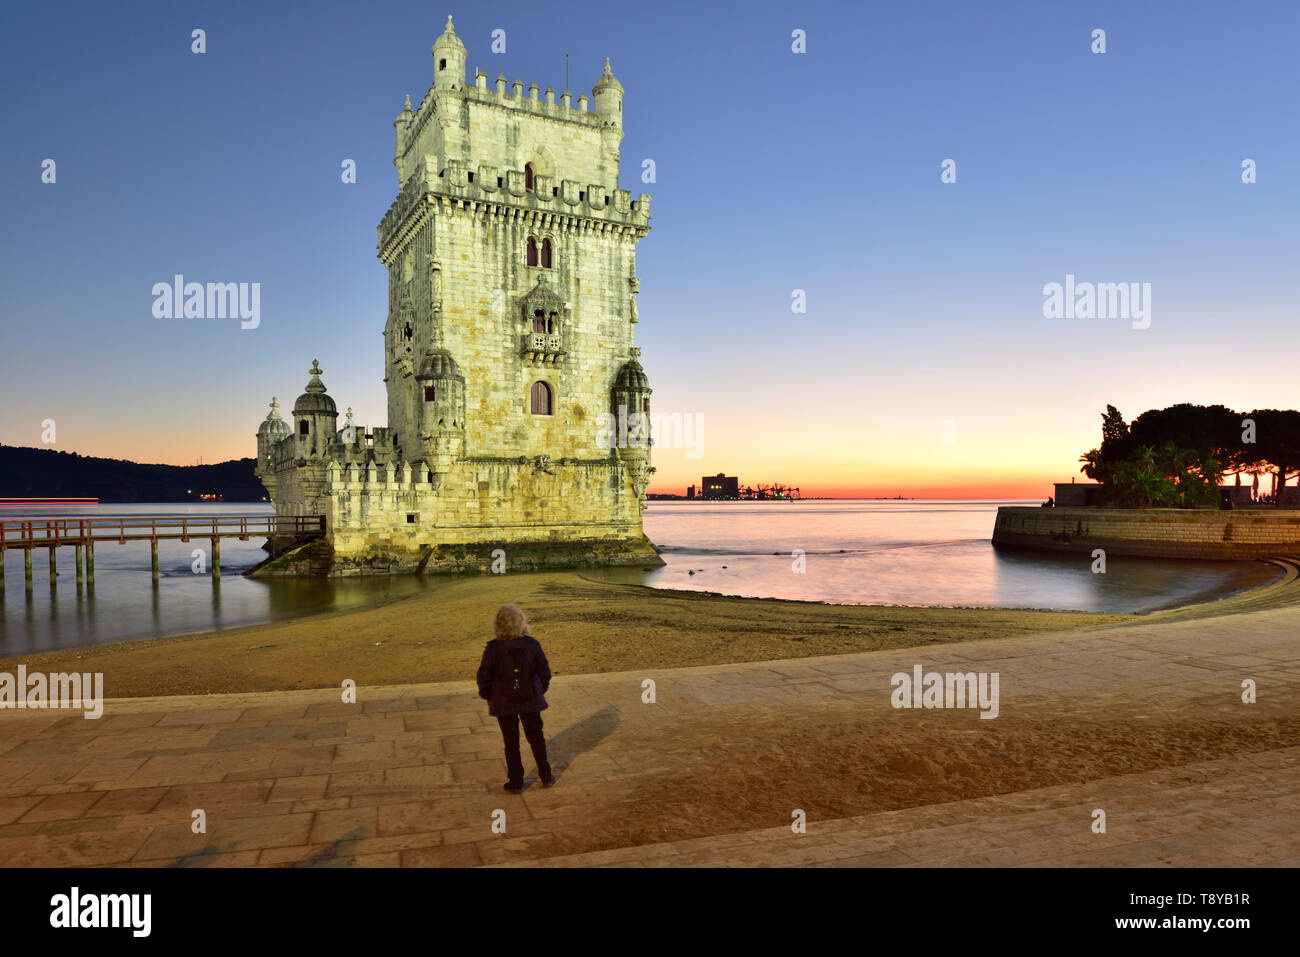 Torre de Belém (Belém Tower), in the Tagus river, a UNESCO World Heritage Site built in the 16th century in Portuguese Manueline Style at twilight. It Stock Photo